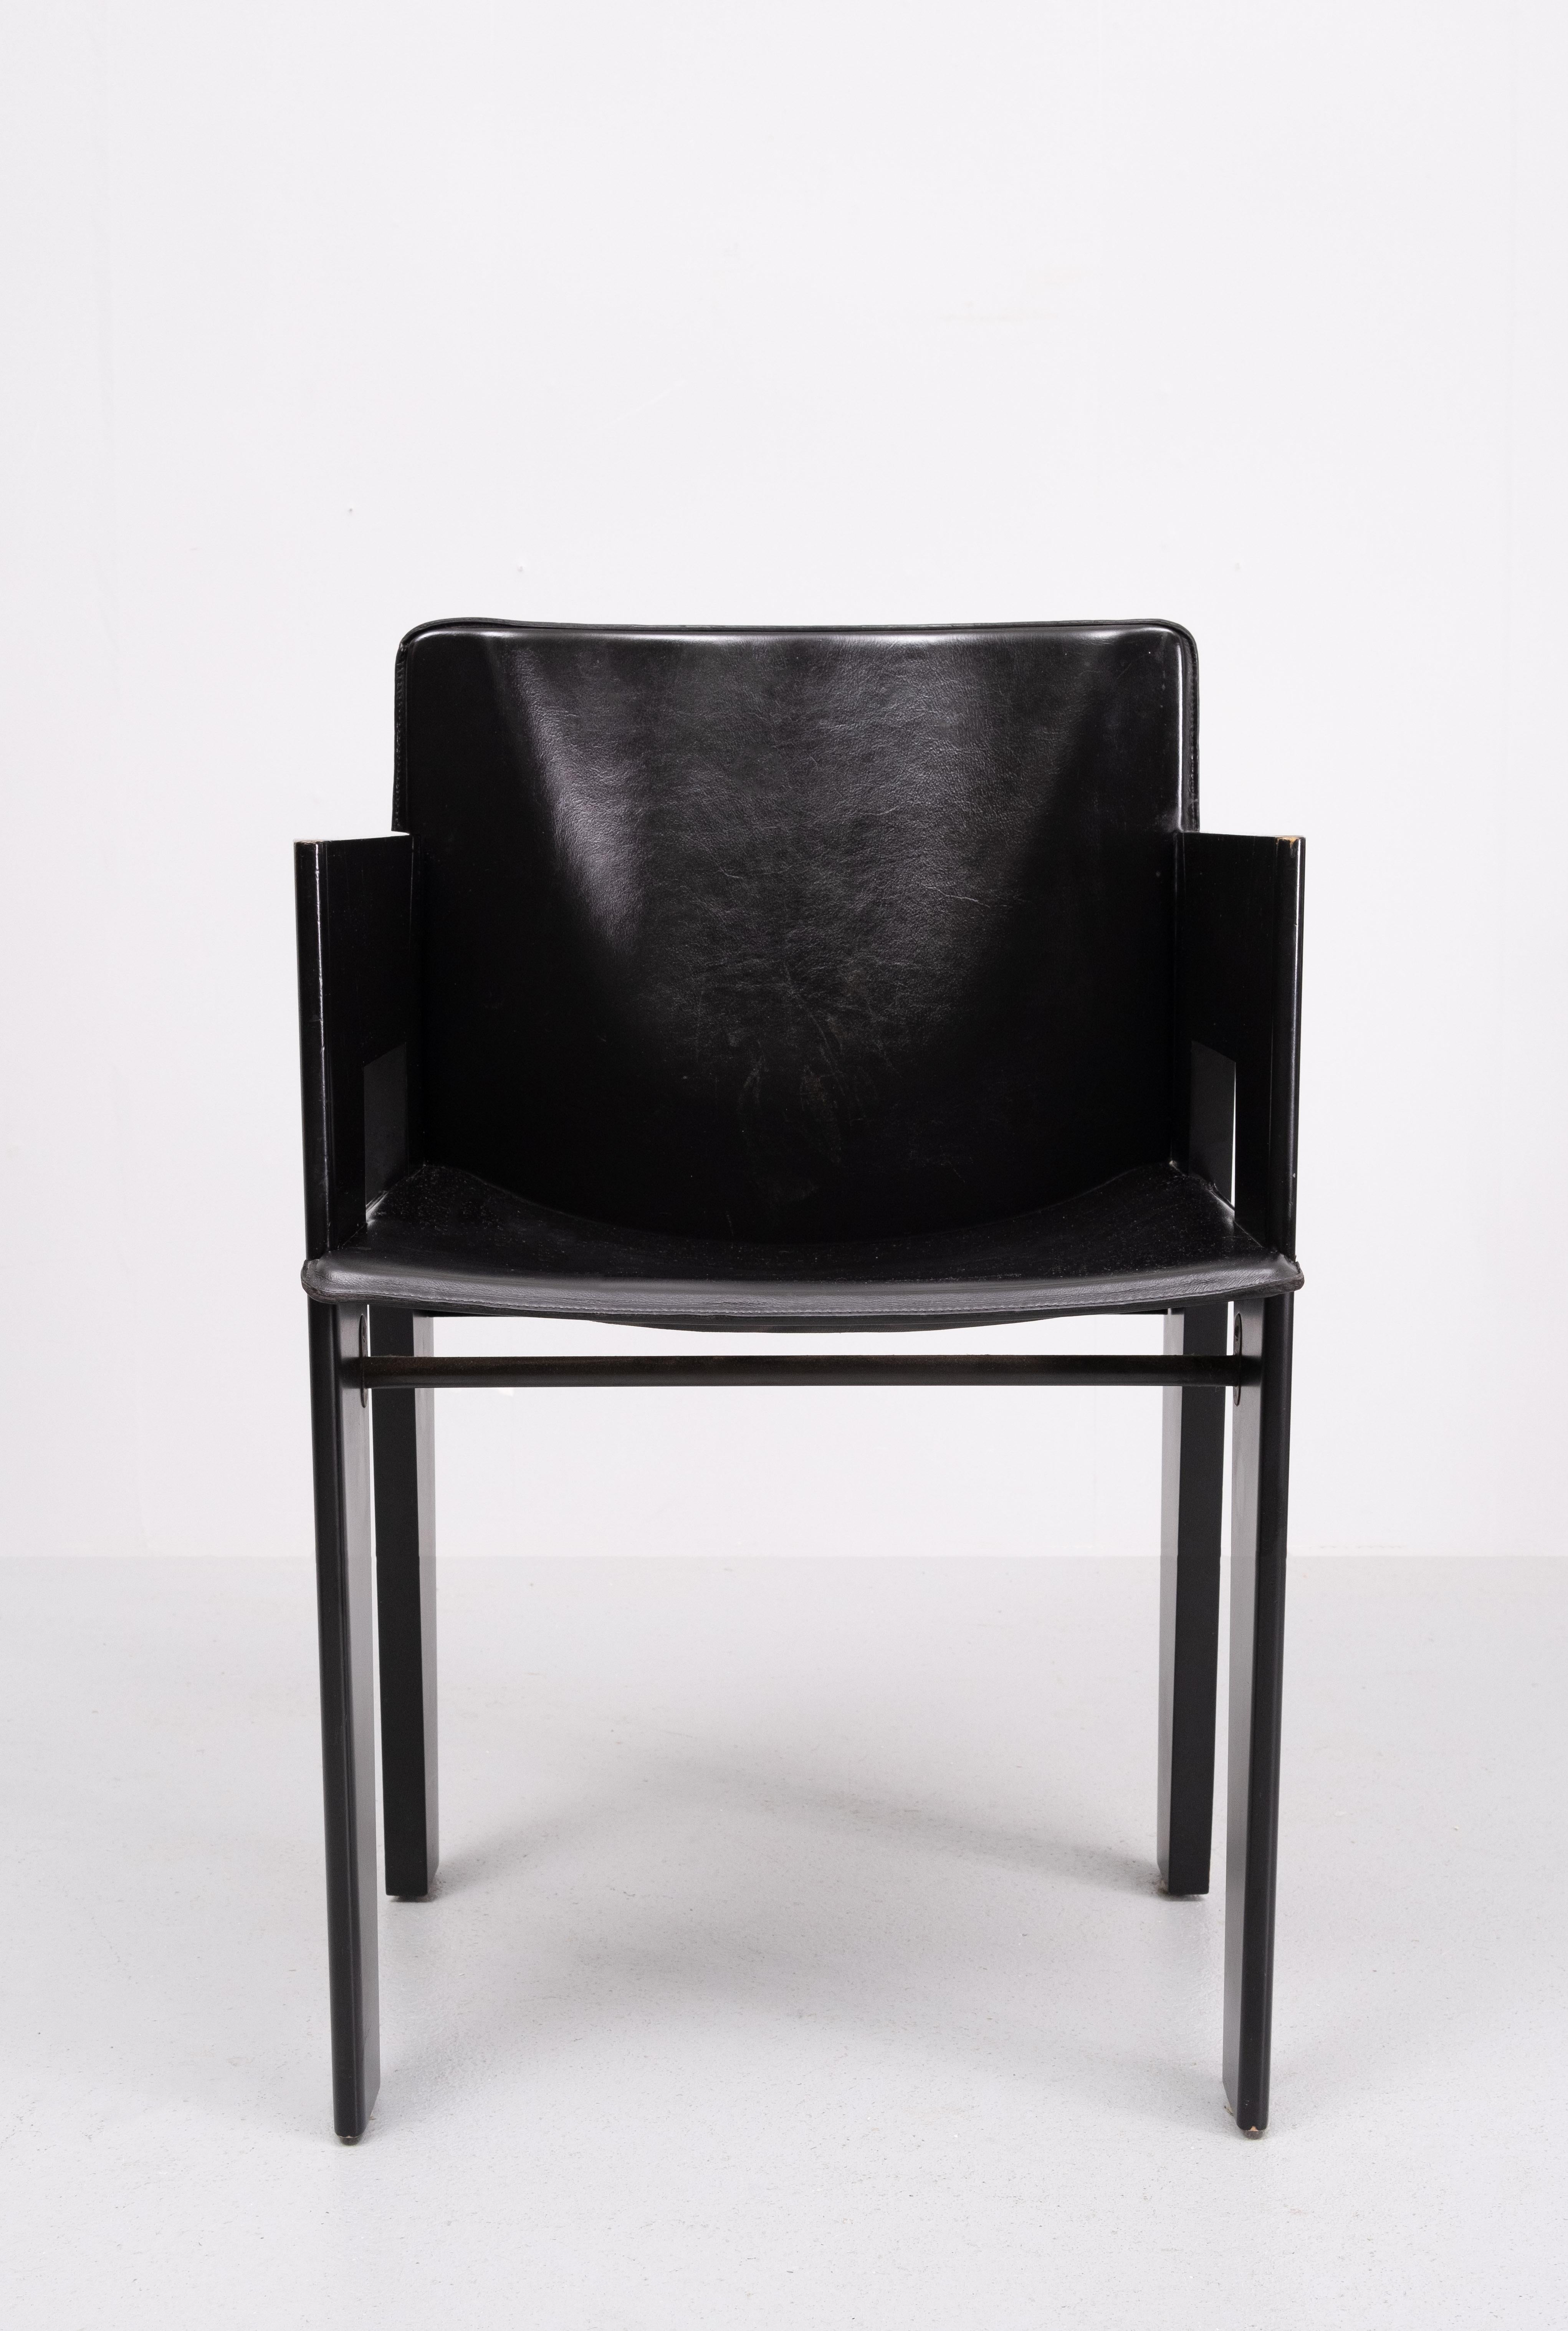 6 Leather & Wood Dining Chairs by Arnold Merckx for Arco, c.1980 For Sale 2